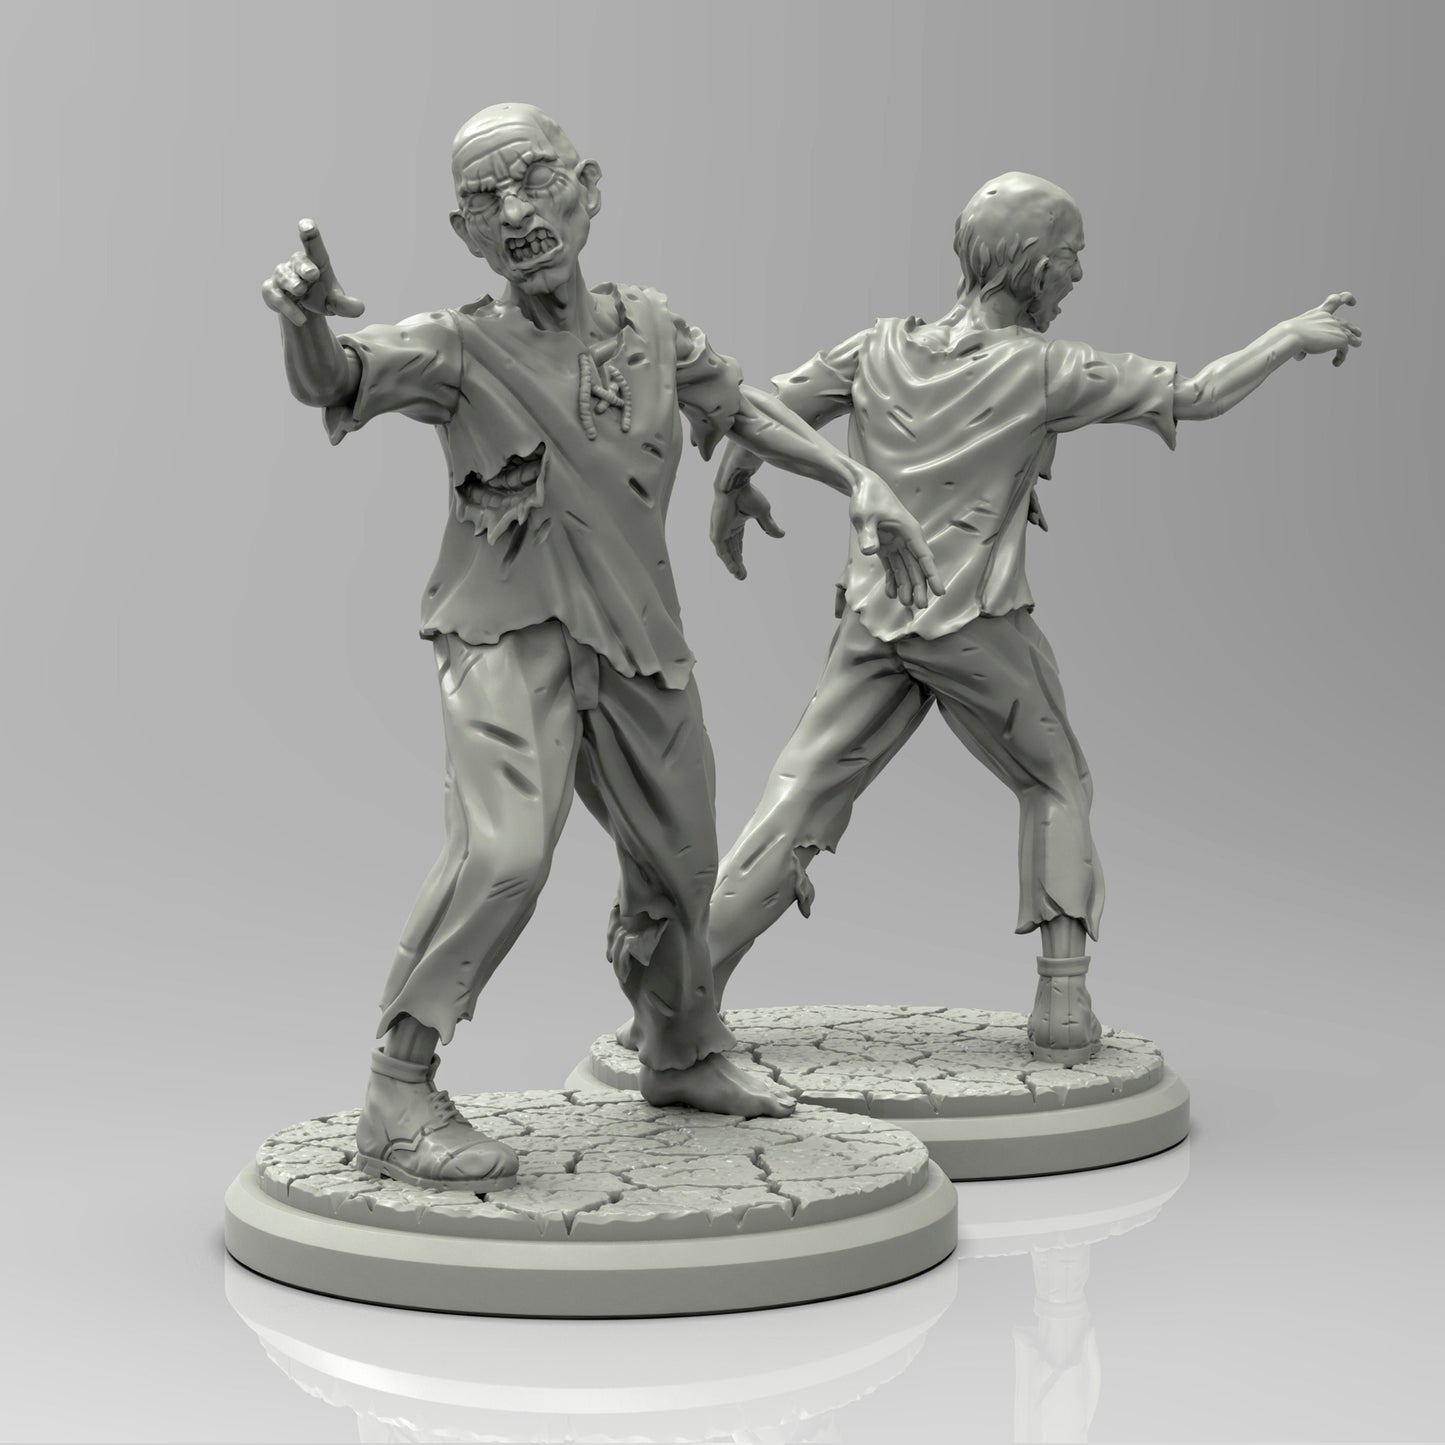 Zombie Miniature - Adaevy Creations - 28mm / 32mm / 36mm